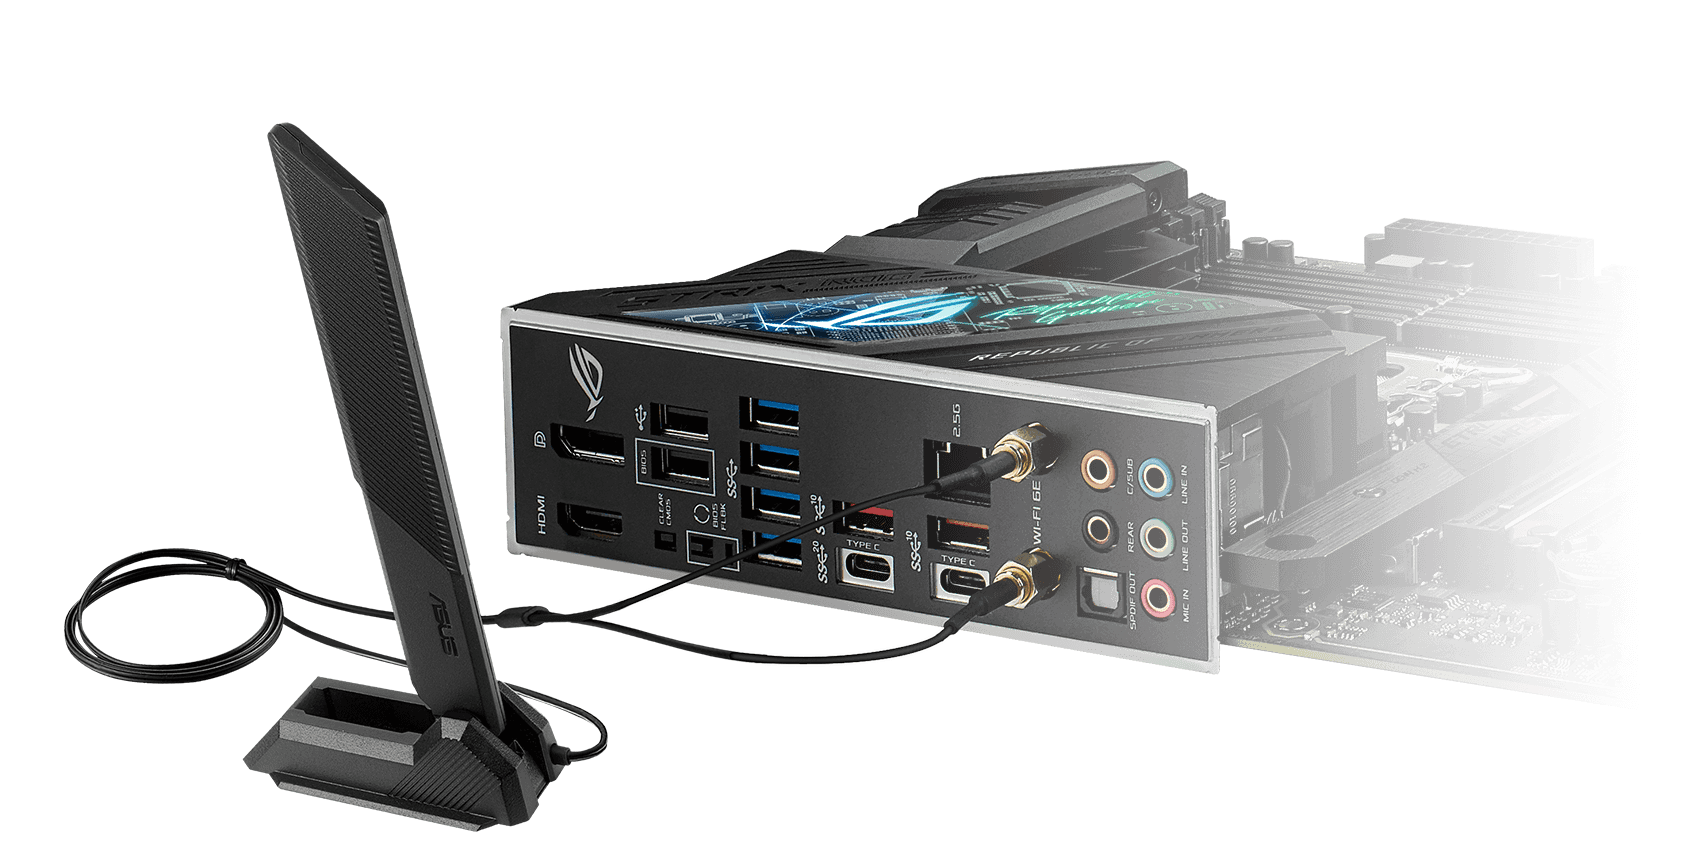 ROG Strix Z690-F Gaming WiFi features WiFi 6E, along with 2.5 Gb Ethernet